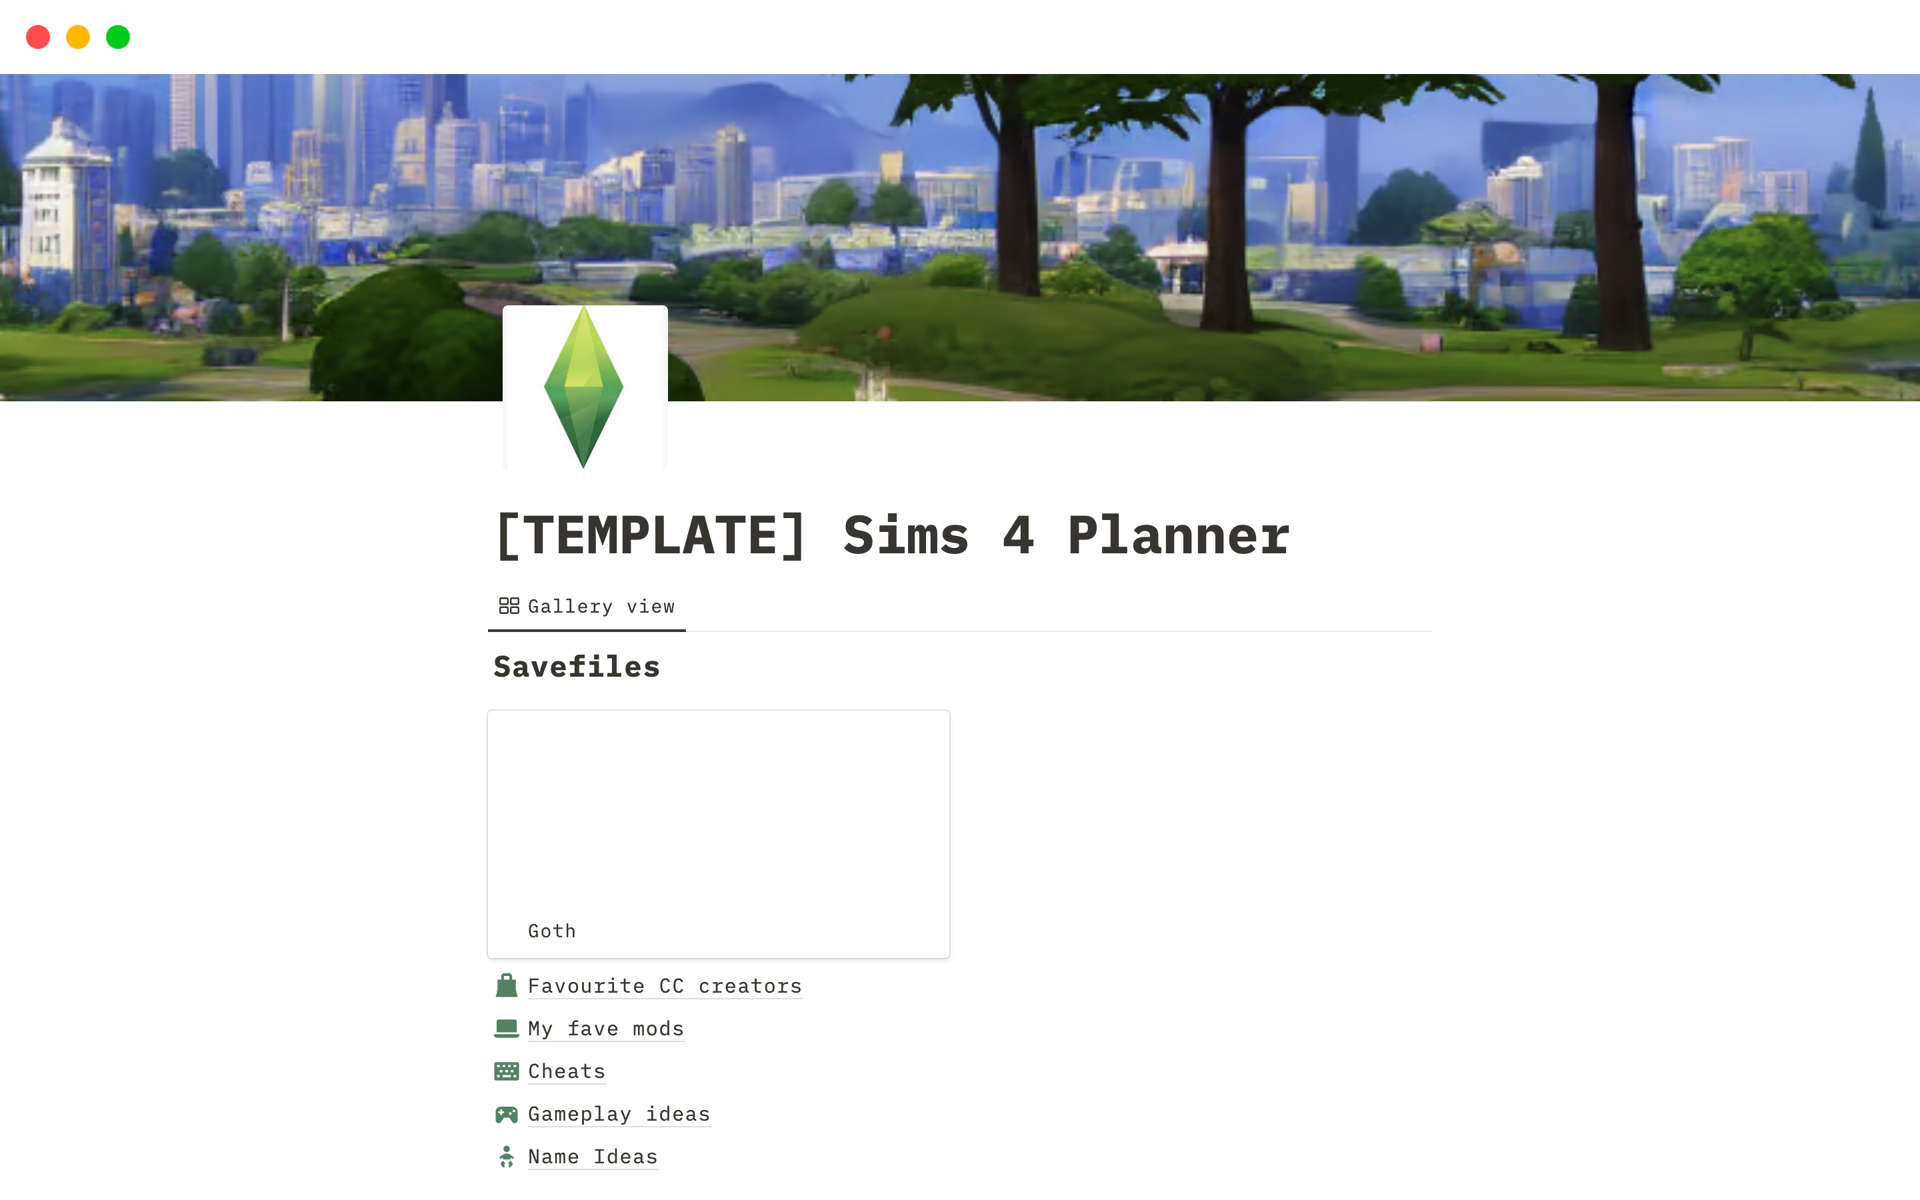 Sims 4 Planner